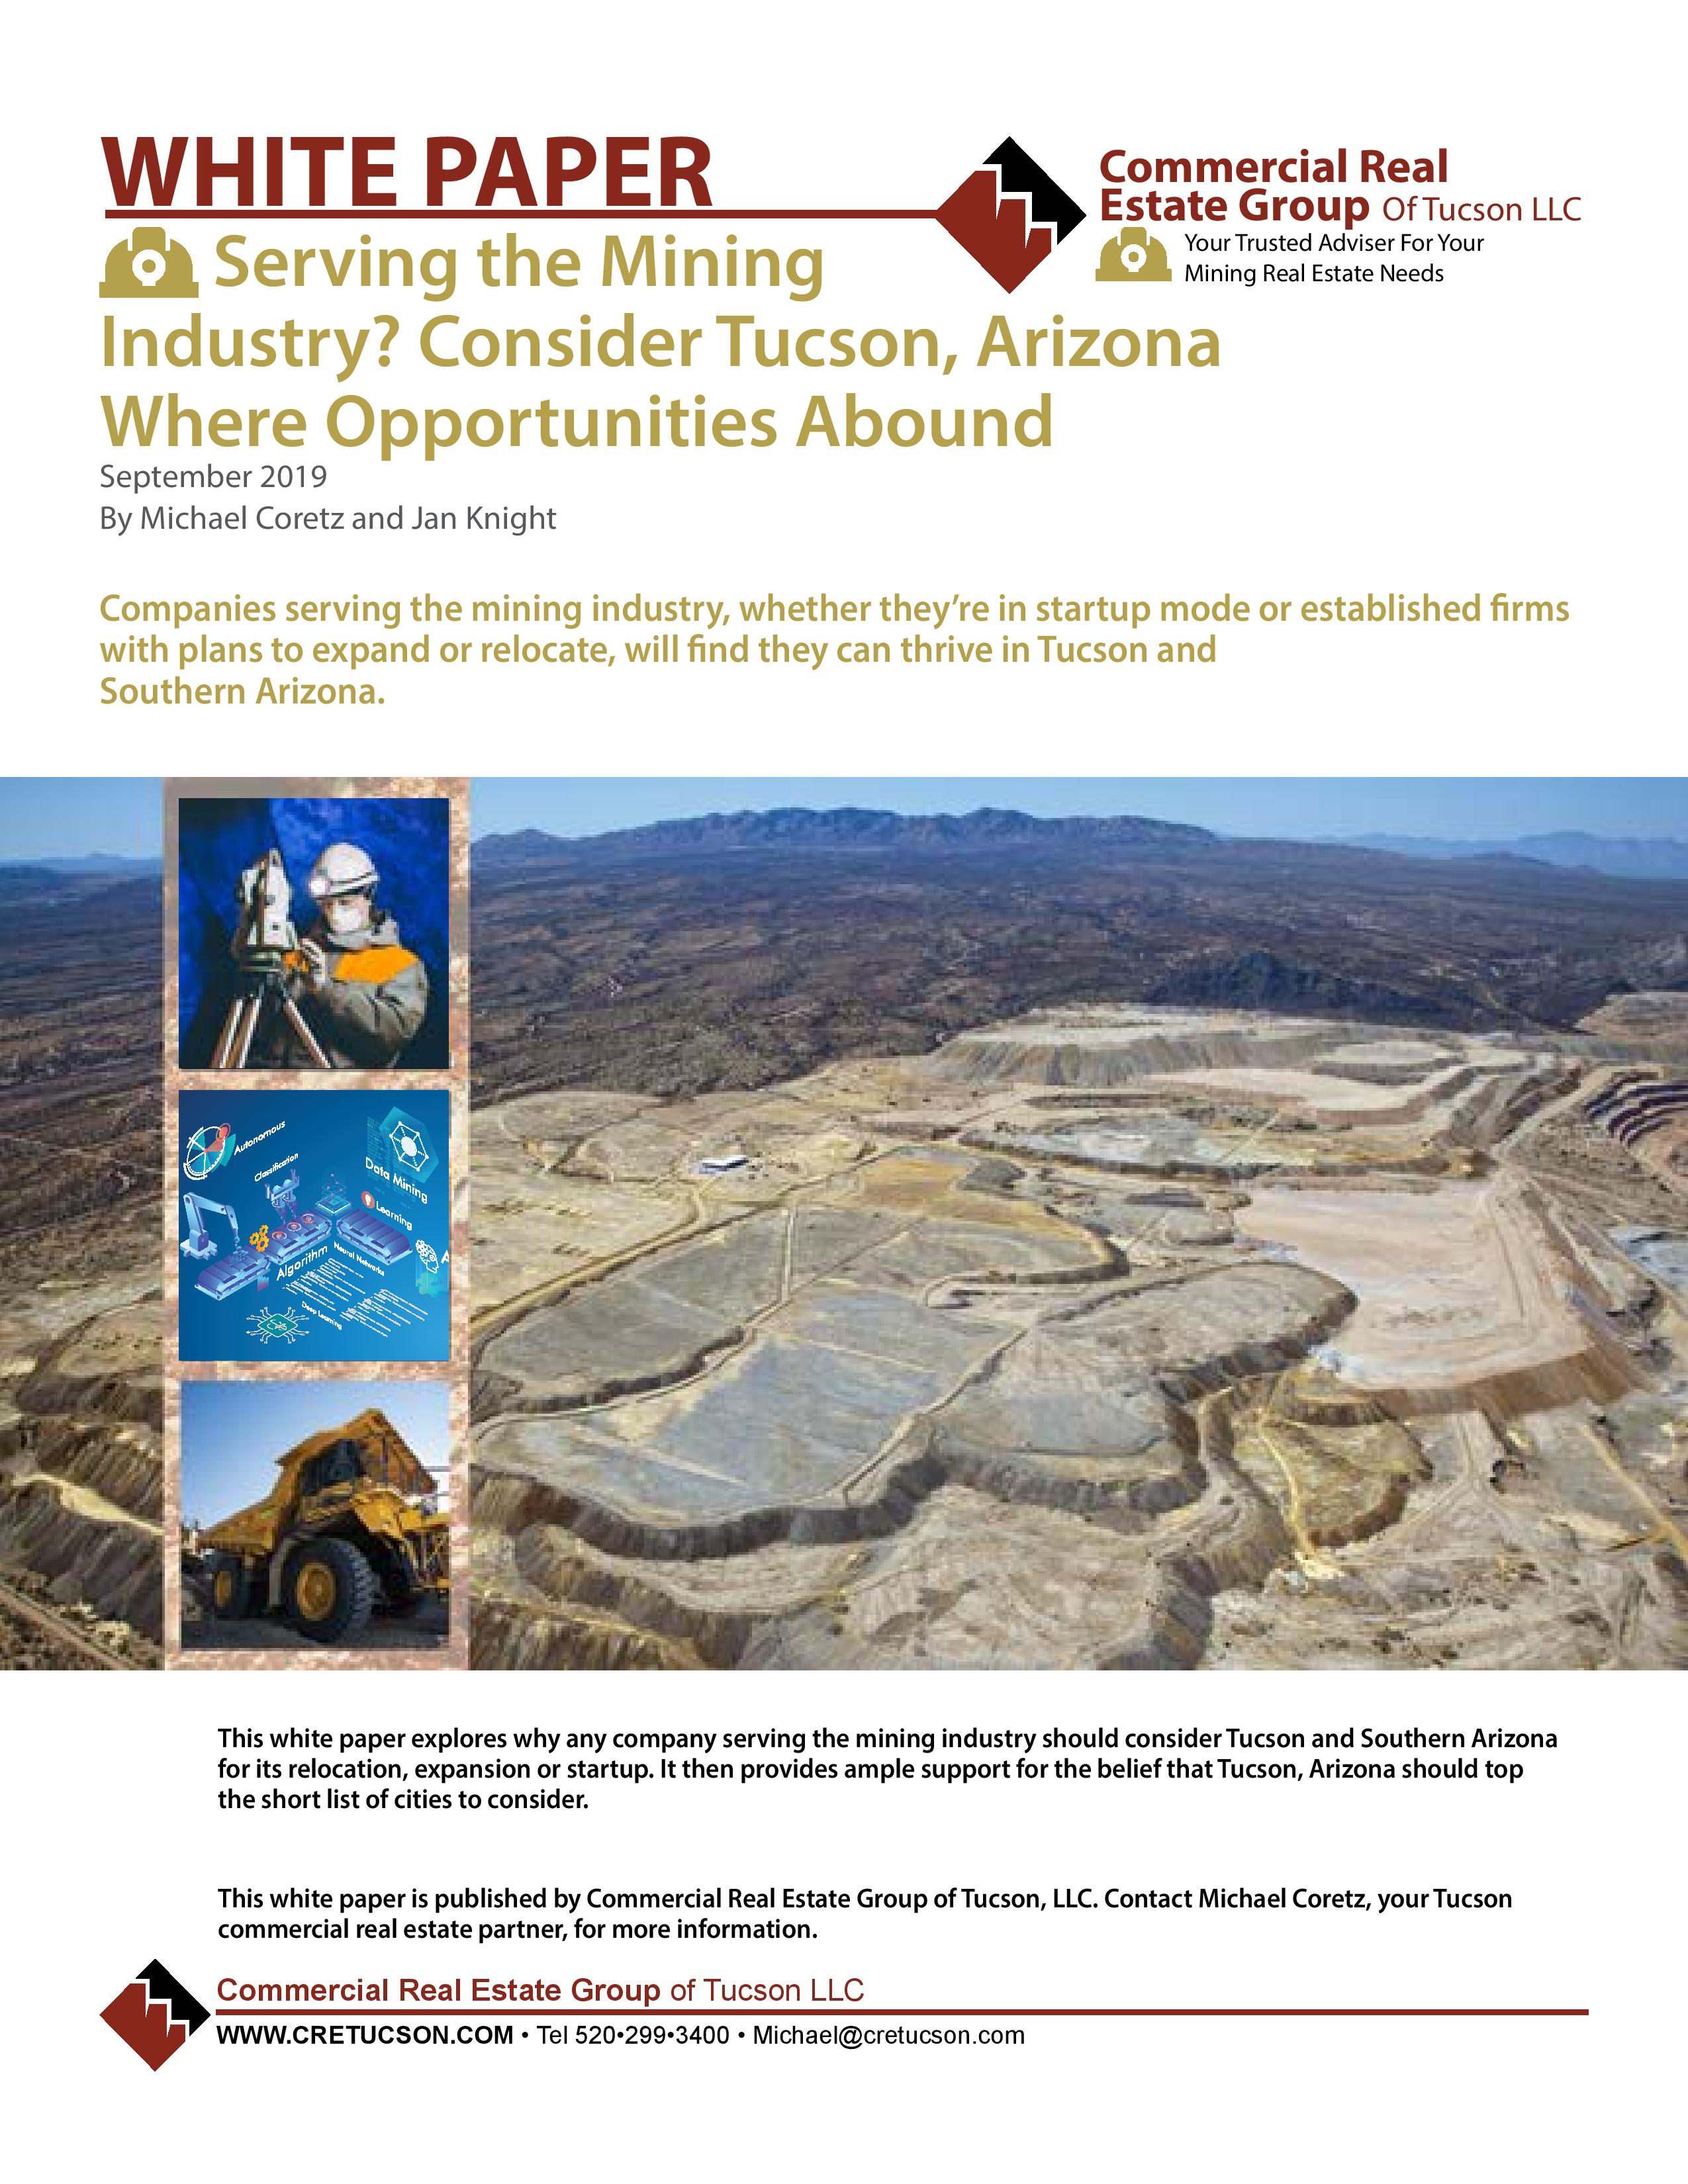 Front page of Tucson mining white paper